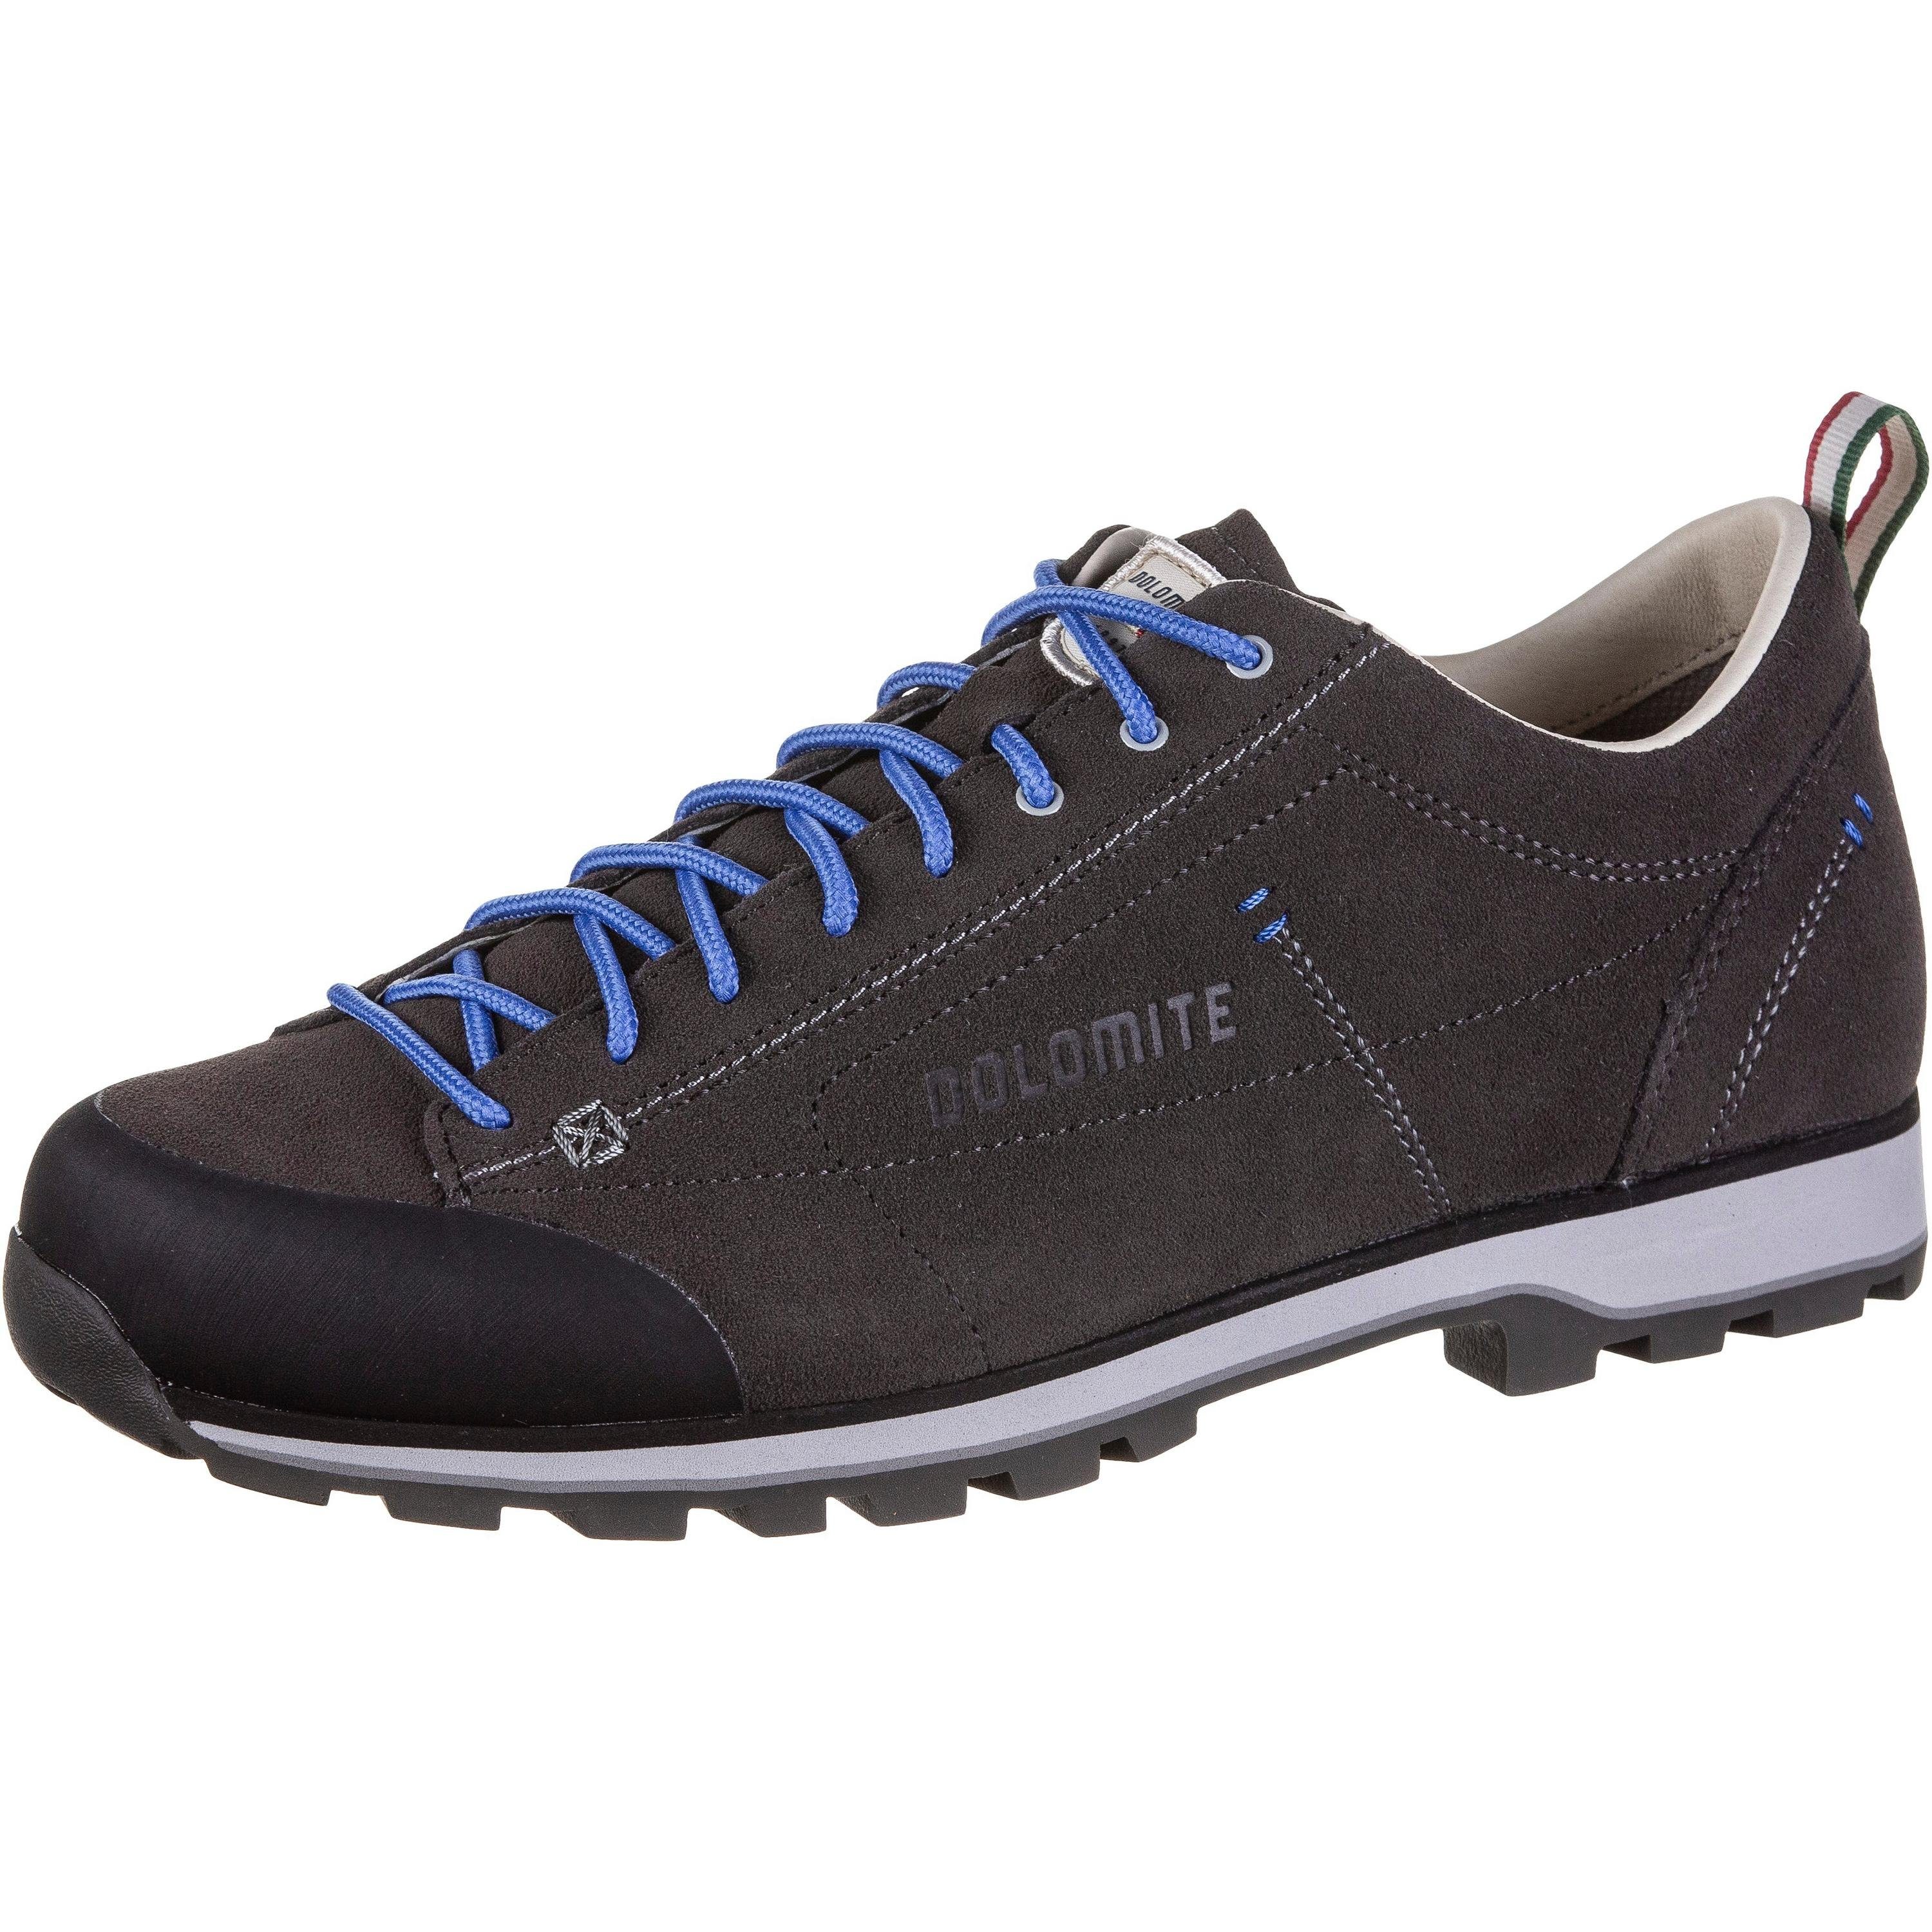 Dolomite Low anthracite-blue 54 Sneaker